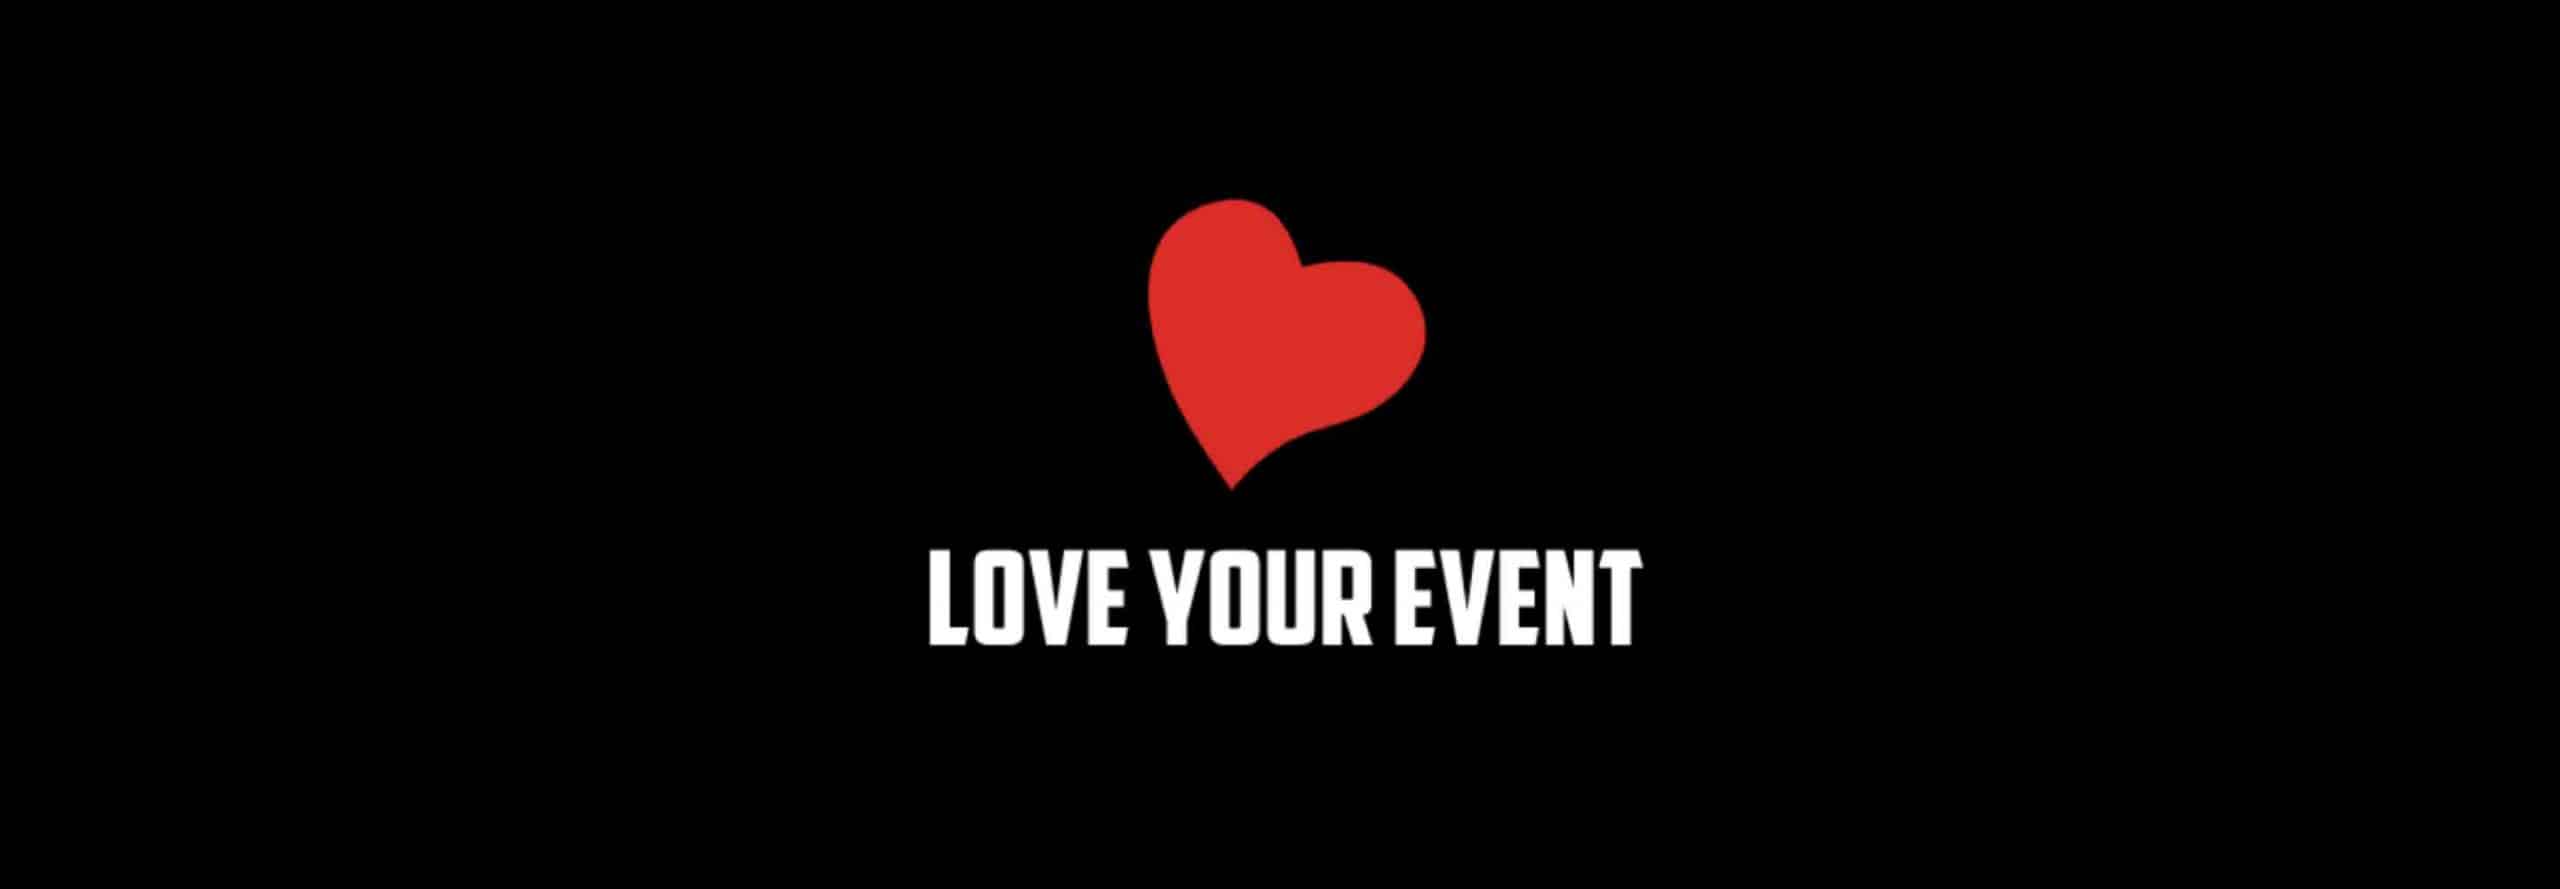 Love Your Event